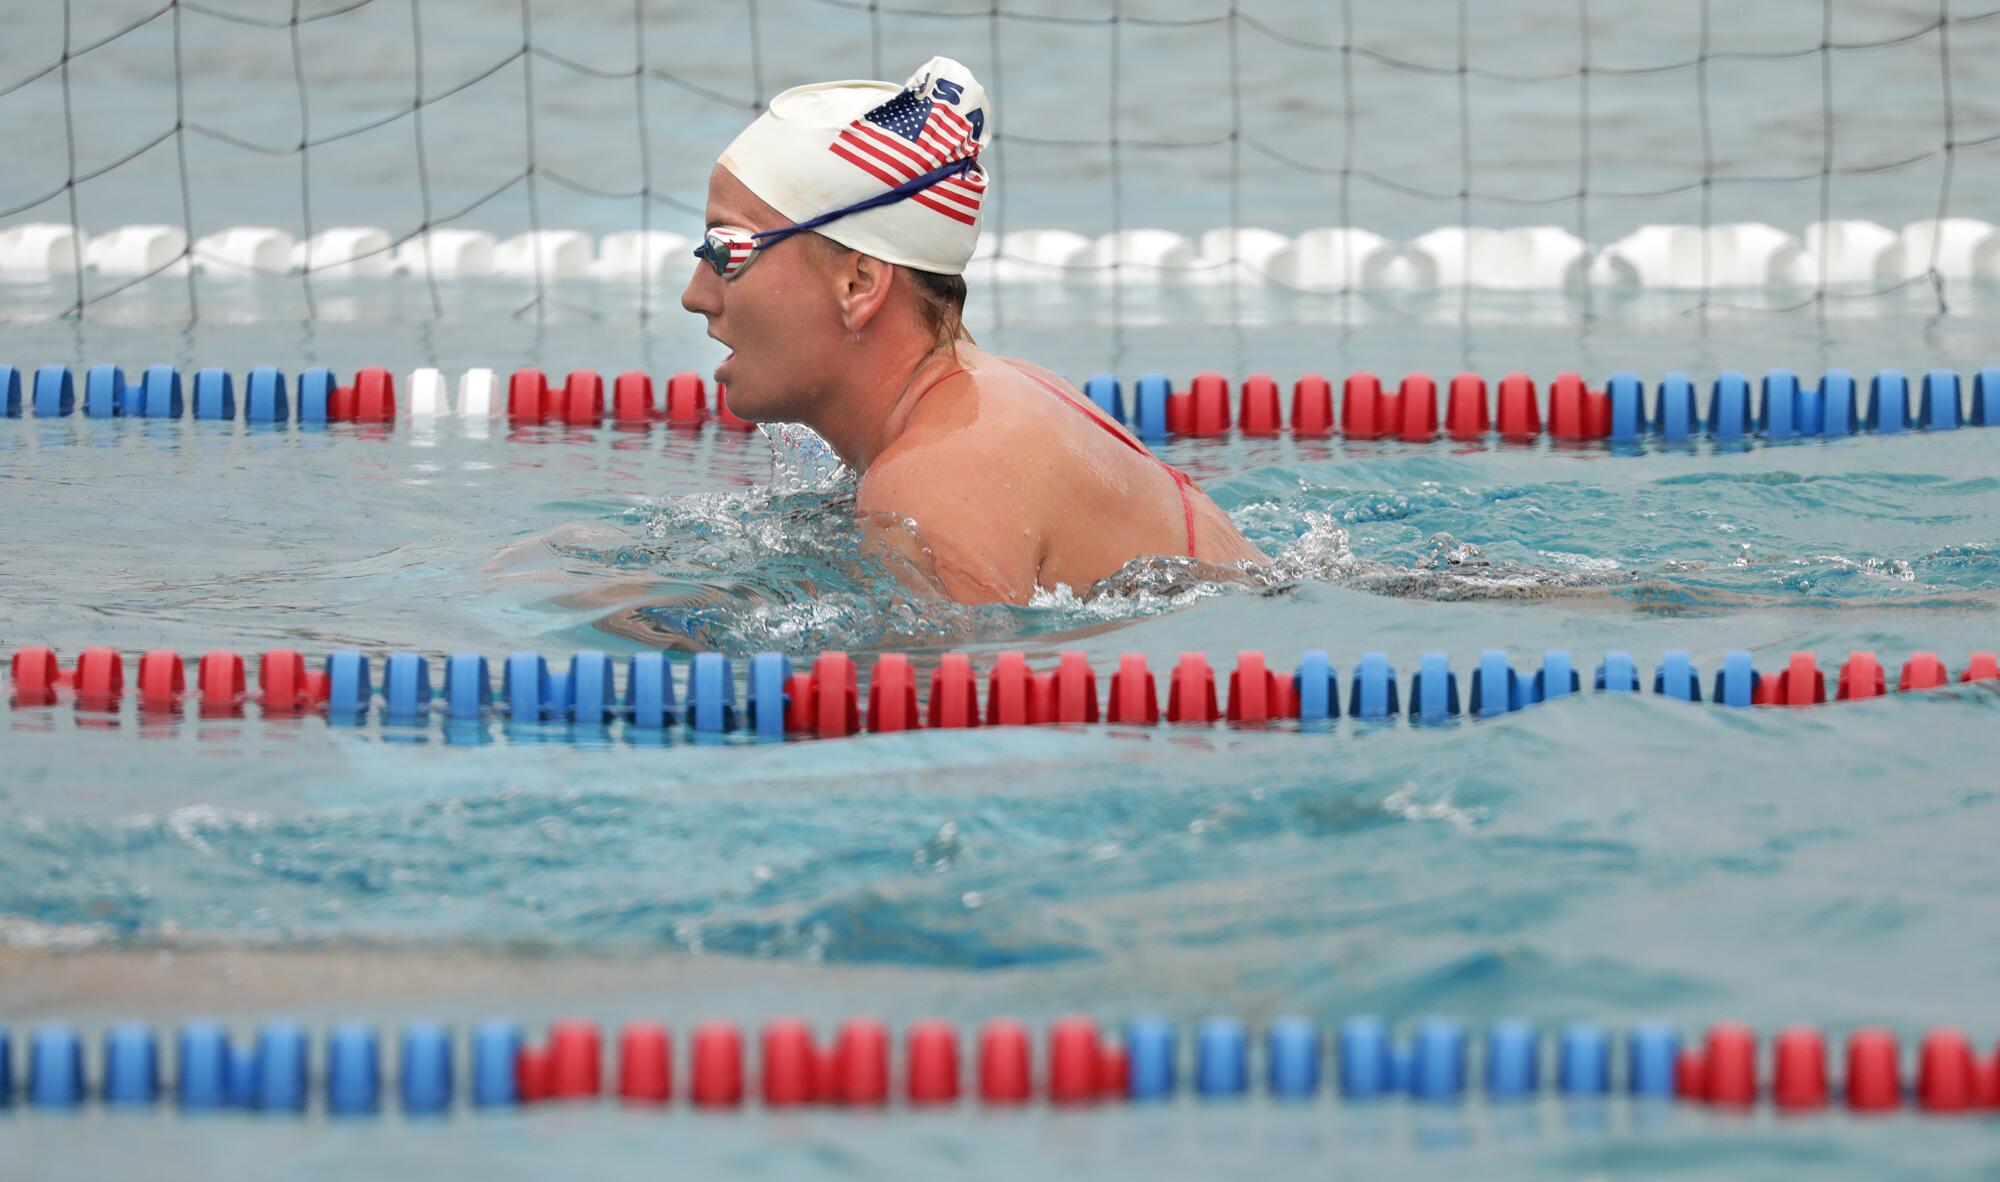 U.S. women's water polo team member Kaleigh Gilchrist practices at Joint Forces Training Base in Los Alamitos.